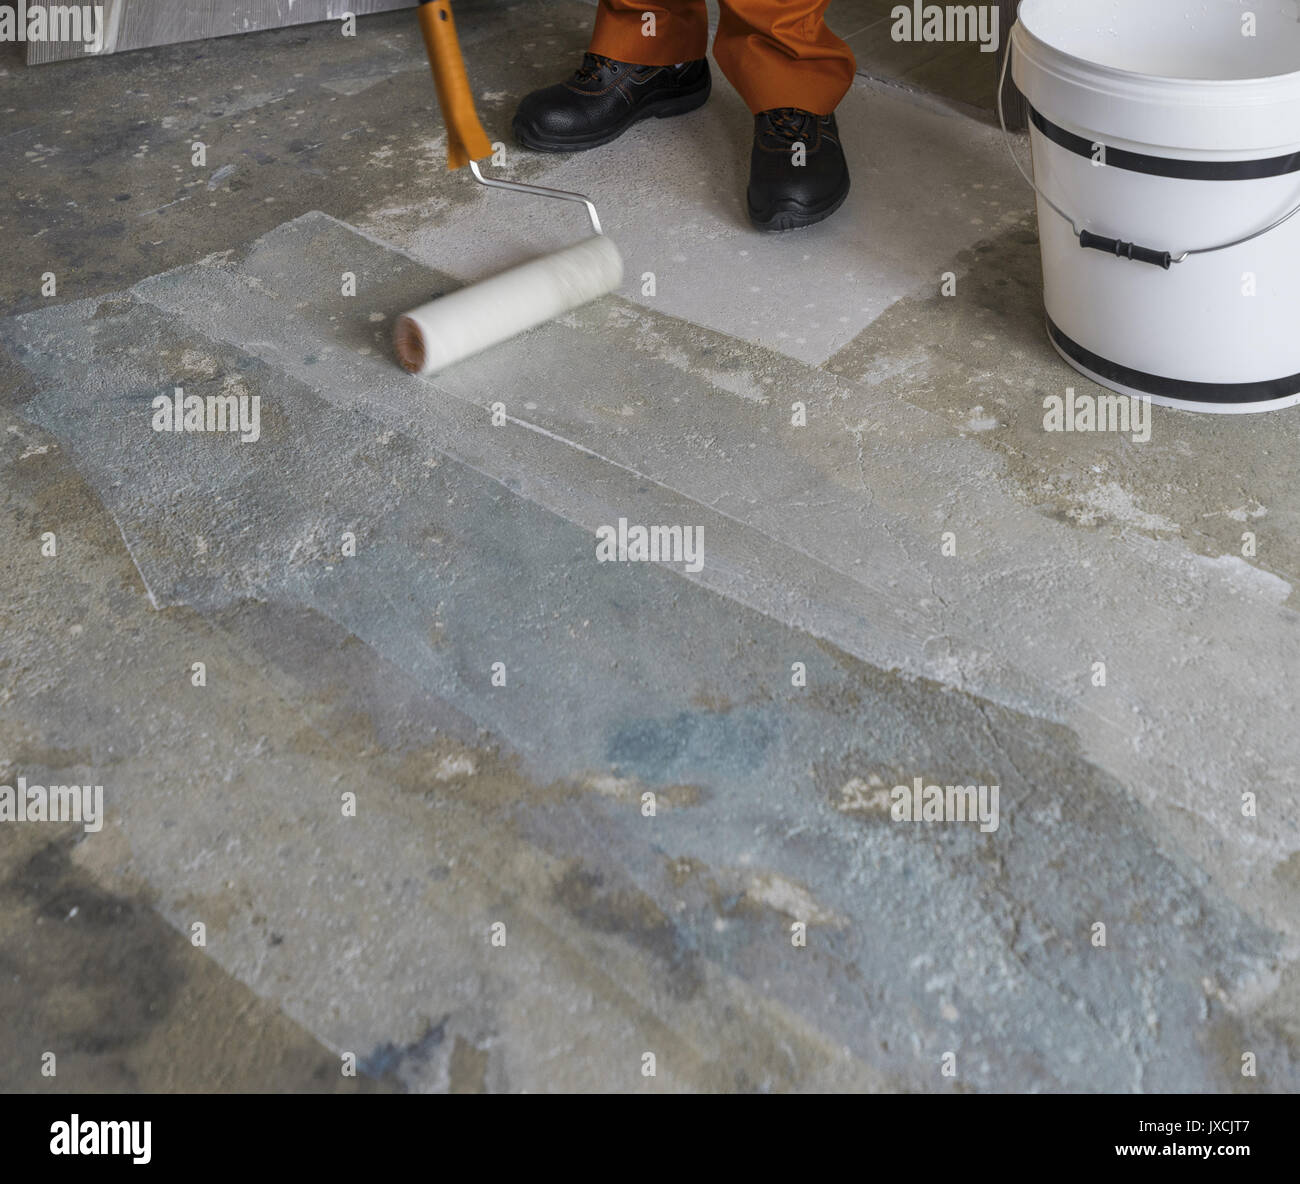 Renovation of house. Worker puts primer with roller on concrete floor Stock Photo